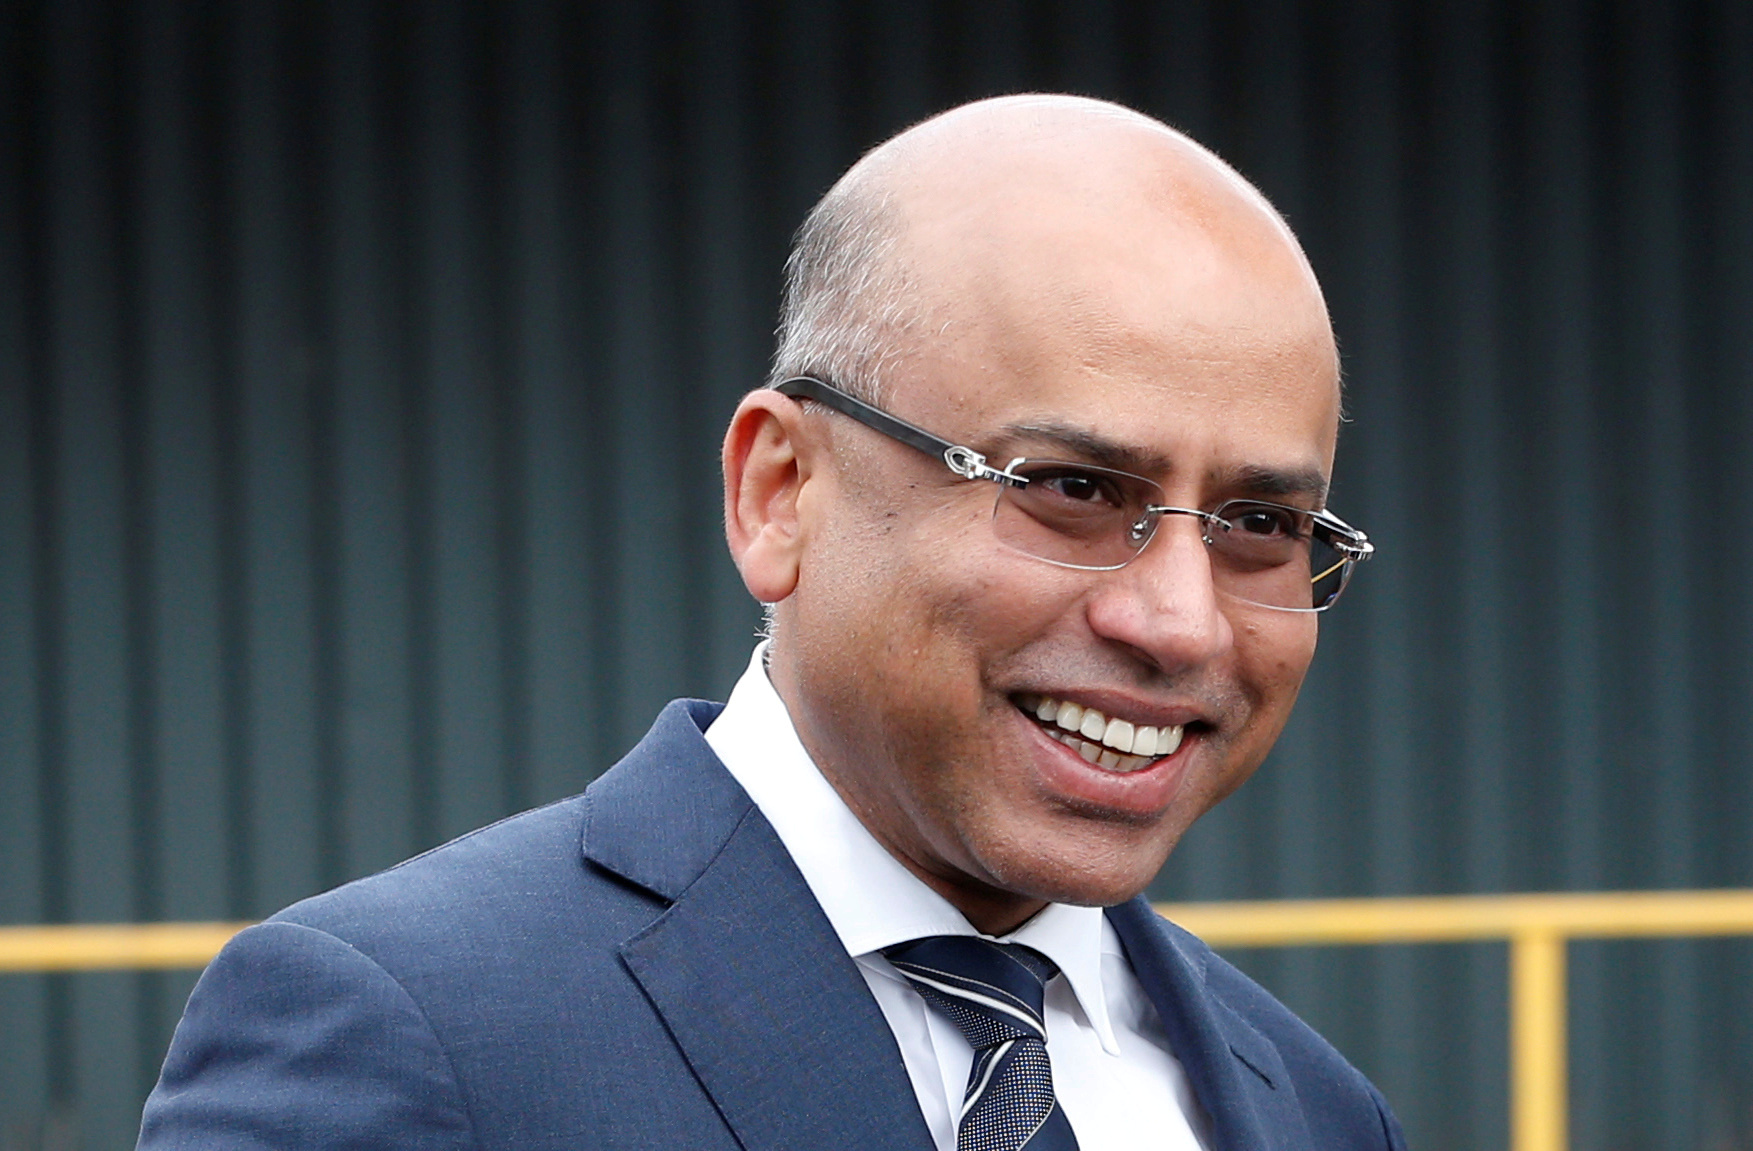 Liberty Steel's Sanjeev Gupta smiles outside their newly acquired Liberty Steel processing mill in Dalzell, Scotland, Britain April 8, 2016. REUTERS/Russell Cheyne/File Photo